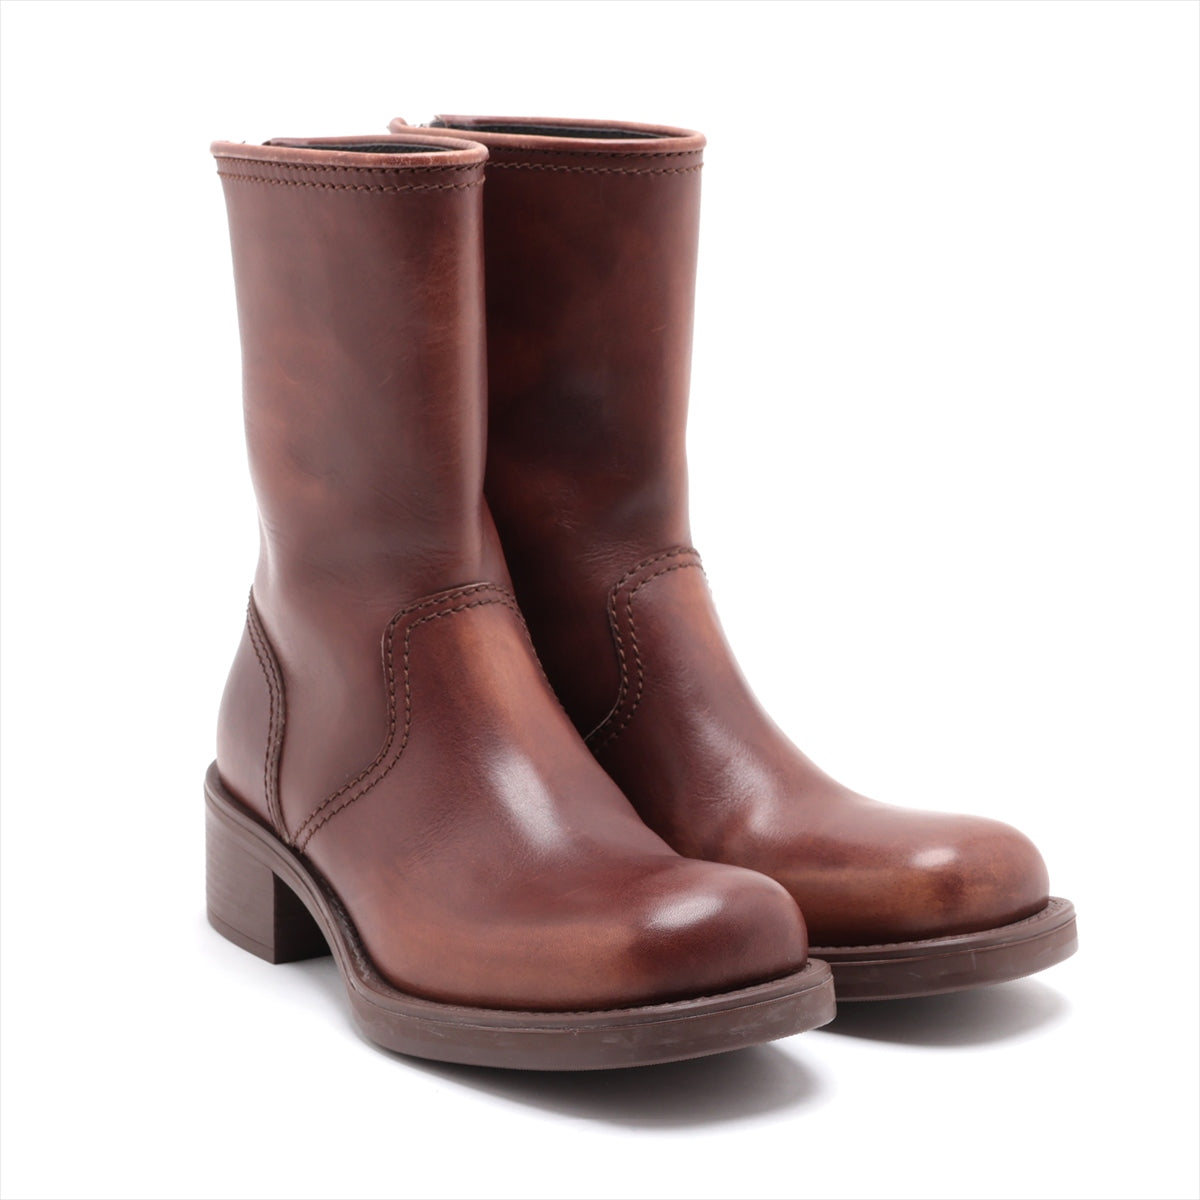 Miu Miu Leather Short Boots 36 Ladies' Brown zips Vintage processing box There is a storage bag